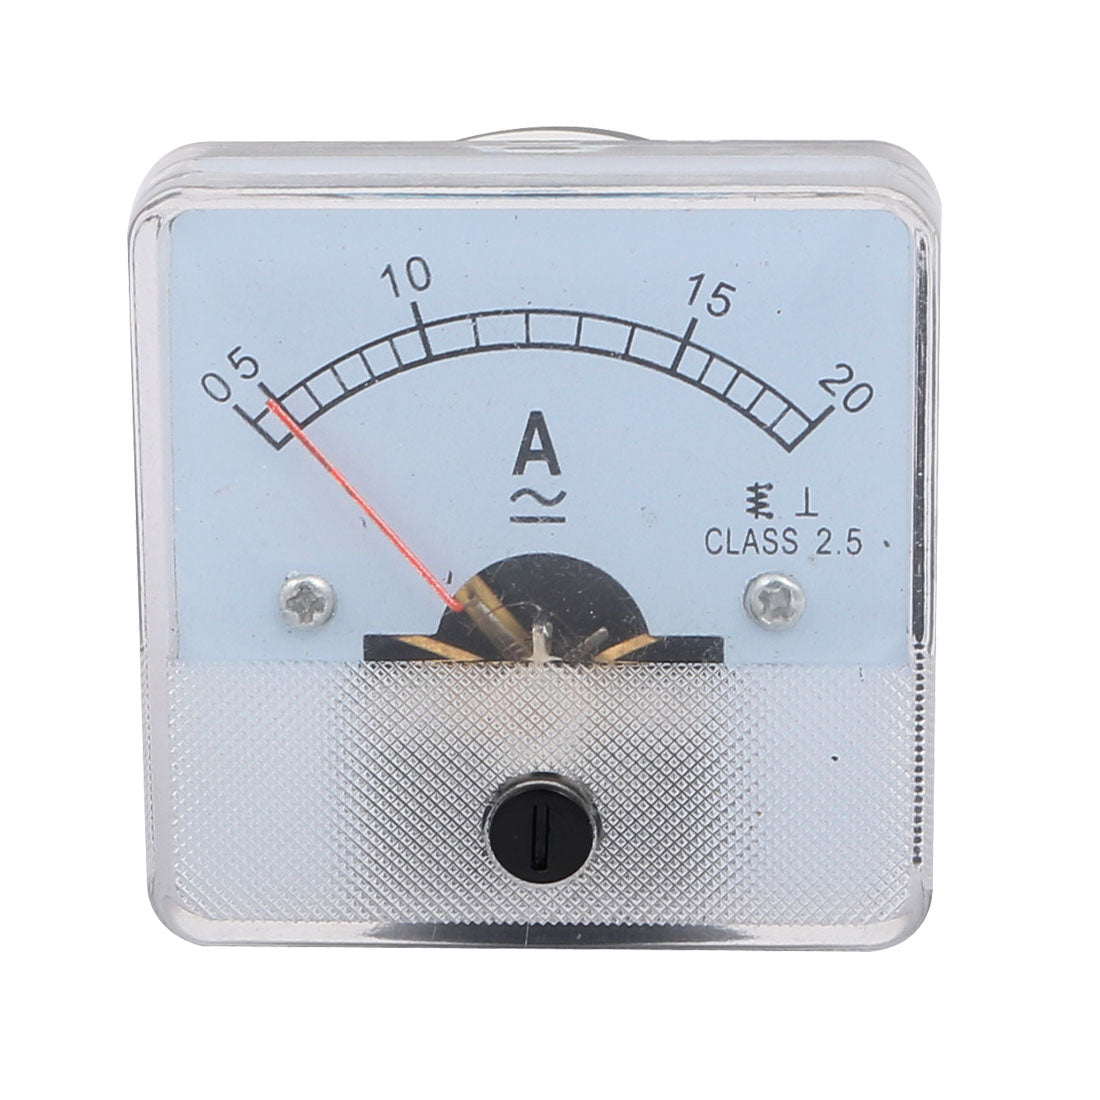 uxcell Uxcell DH50 Class 2.5 Accuracy AC 0-20A Analog Panel Meter Ammeter Amperemeter